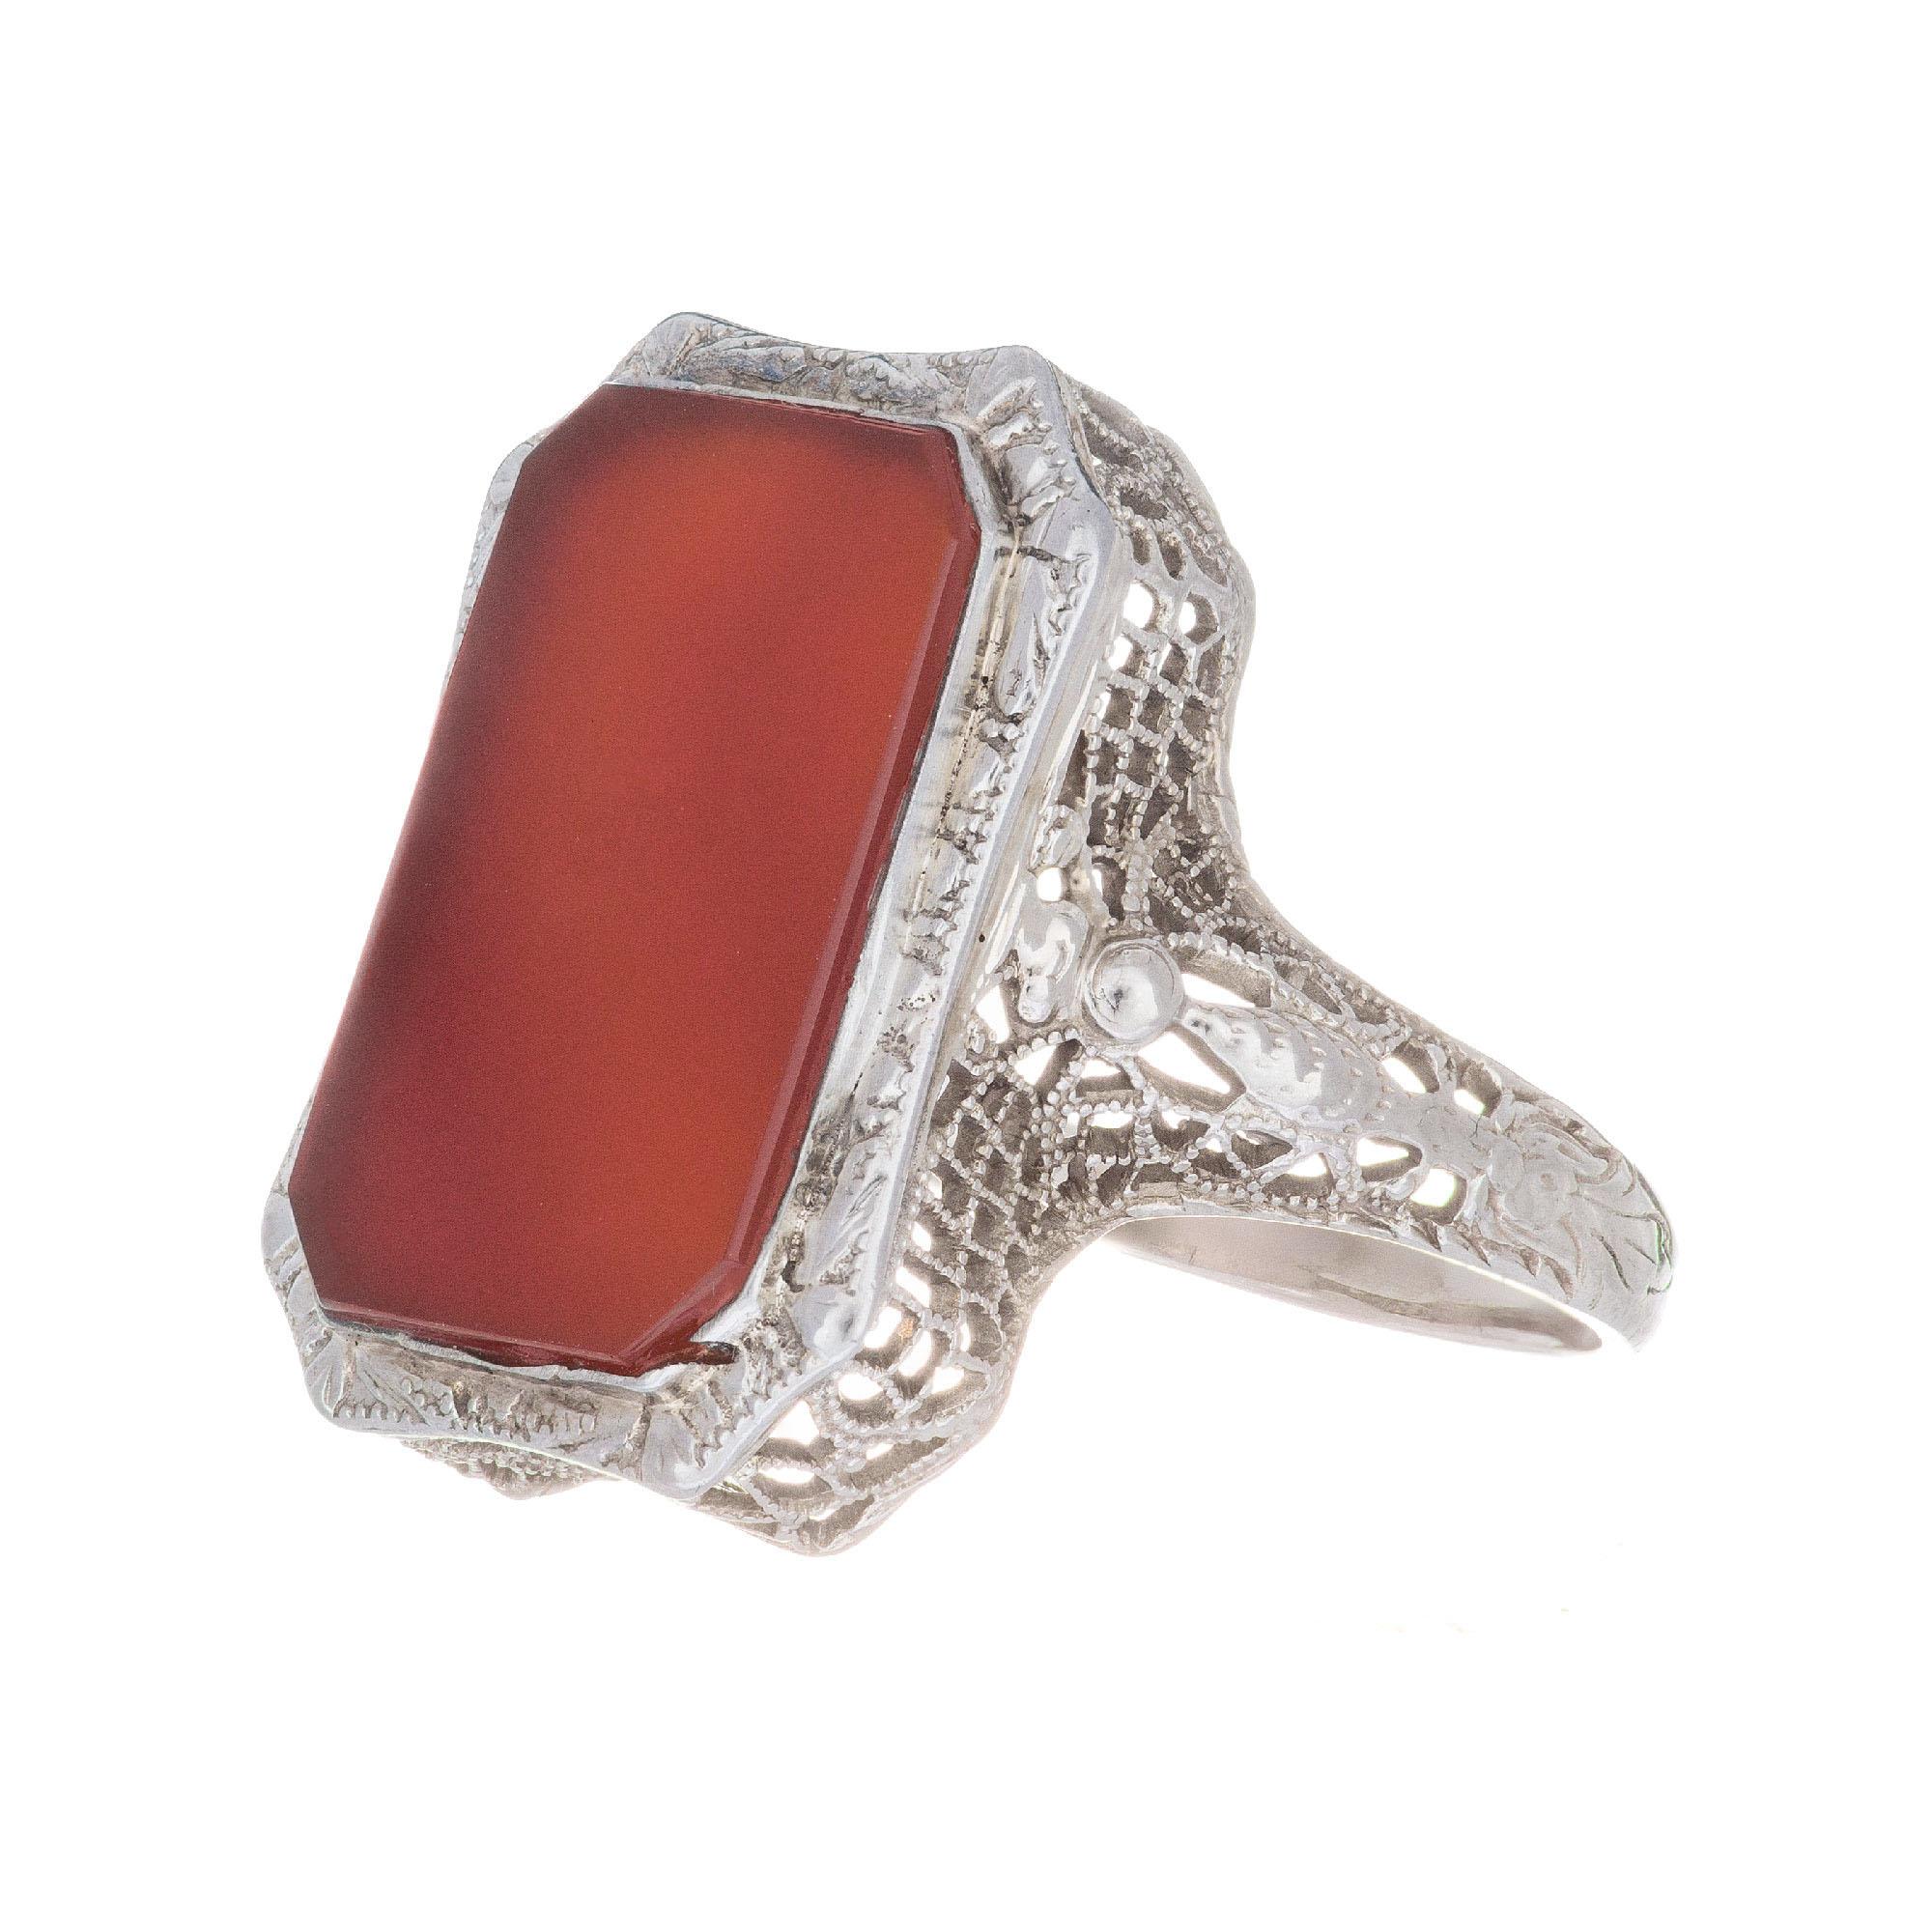 Estate 1930's translucent rectangular carnelian center stone in a 14k white gold filigree setting. 

1 cut cornered rectangular orange carnelian 
Size 7 and sizable
14k white gold 
Stamped: 14k
3.7 grams
Width at top: 19.6mm
Height at top: